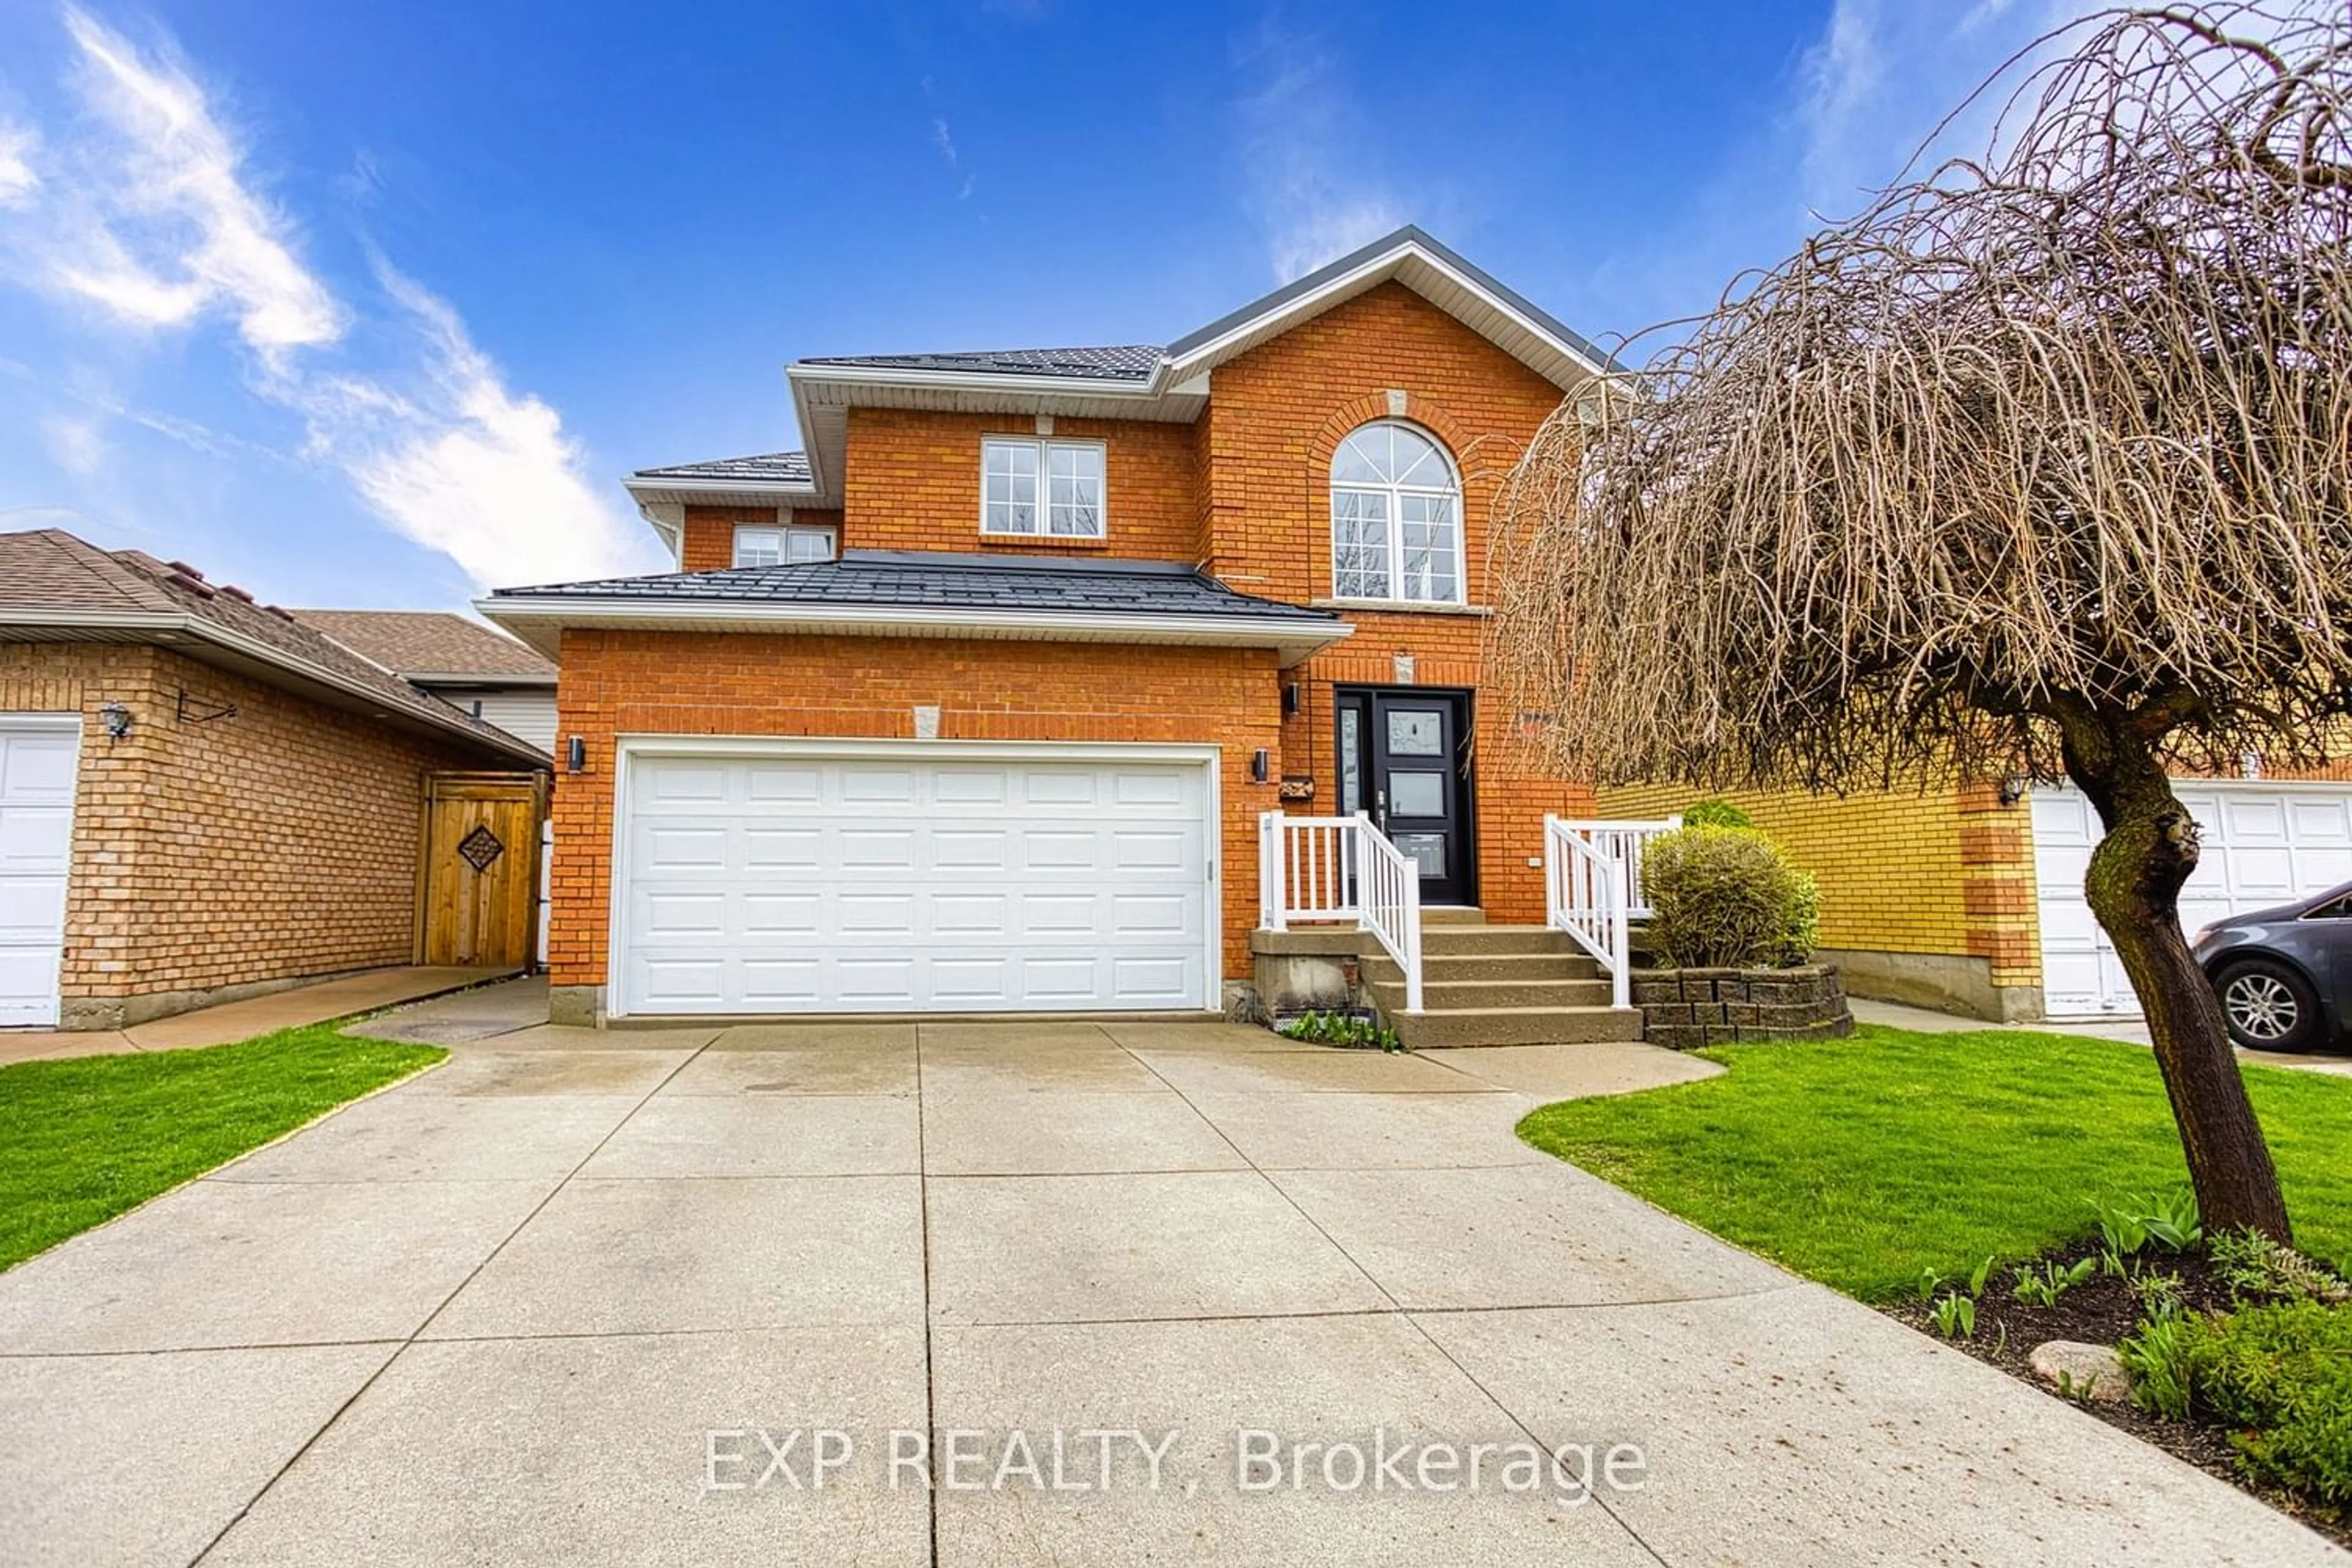 Frontside or backside of a home for 492 Stone Church Rd, Hamilton Ontario L8W 3X5